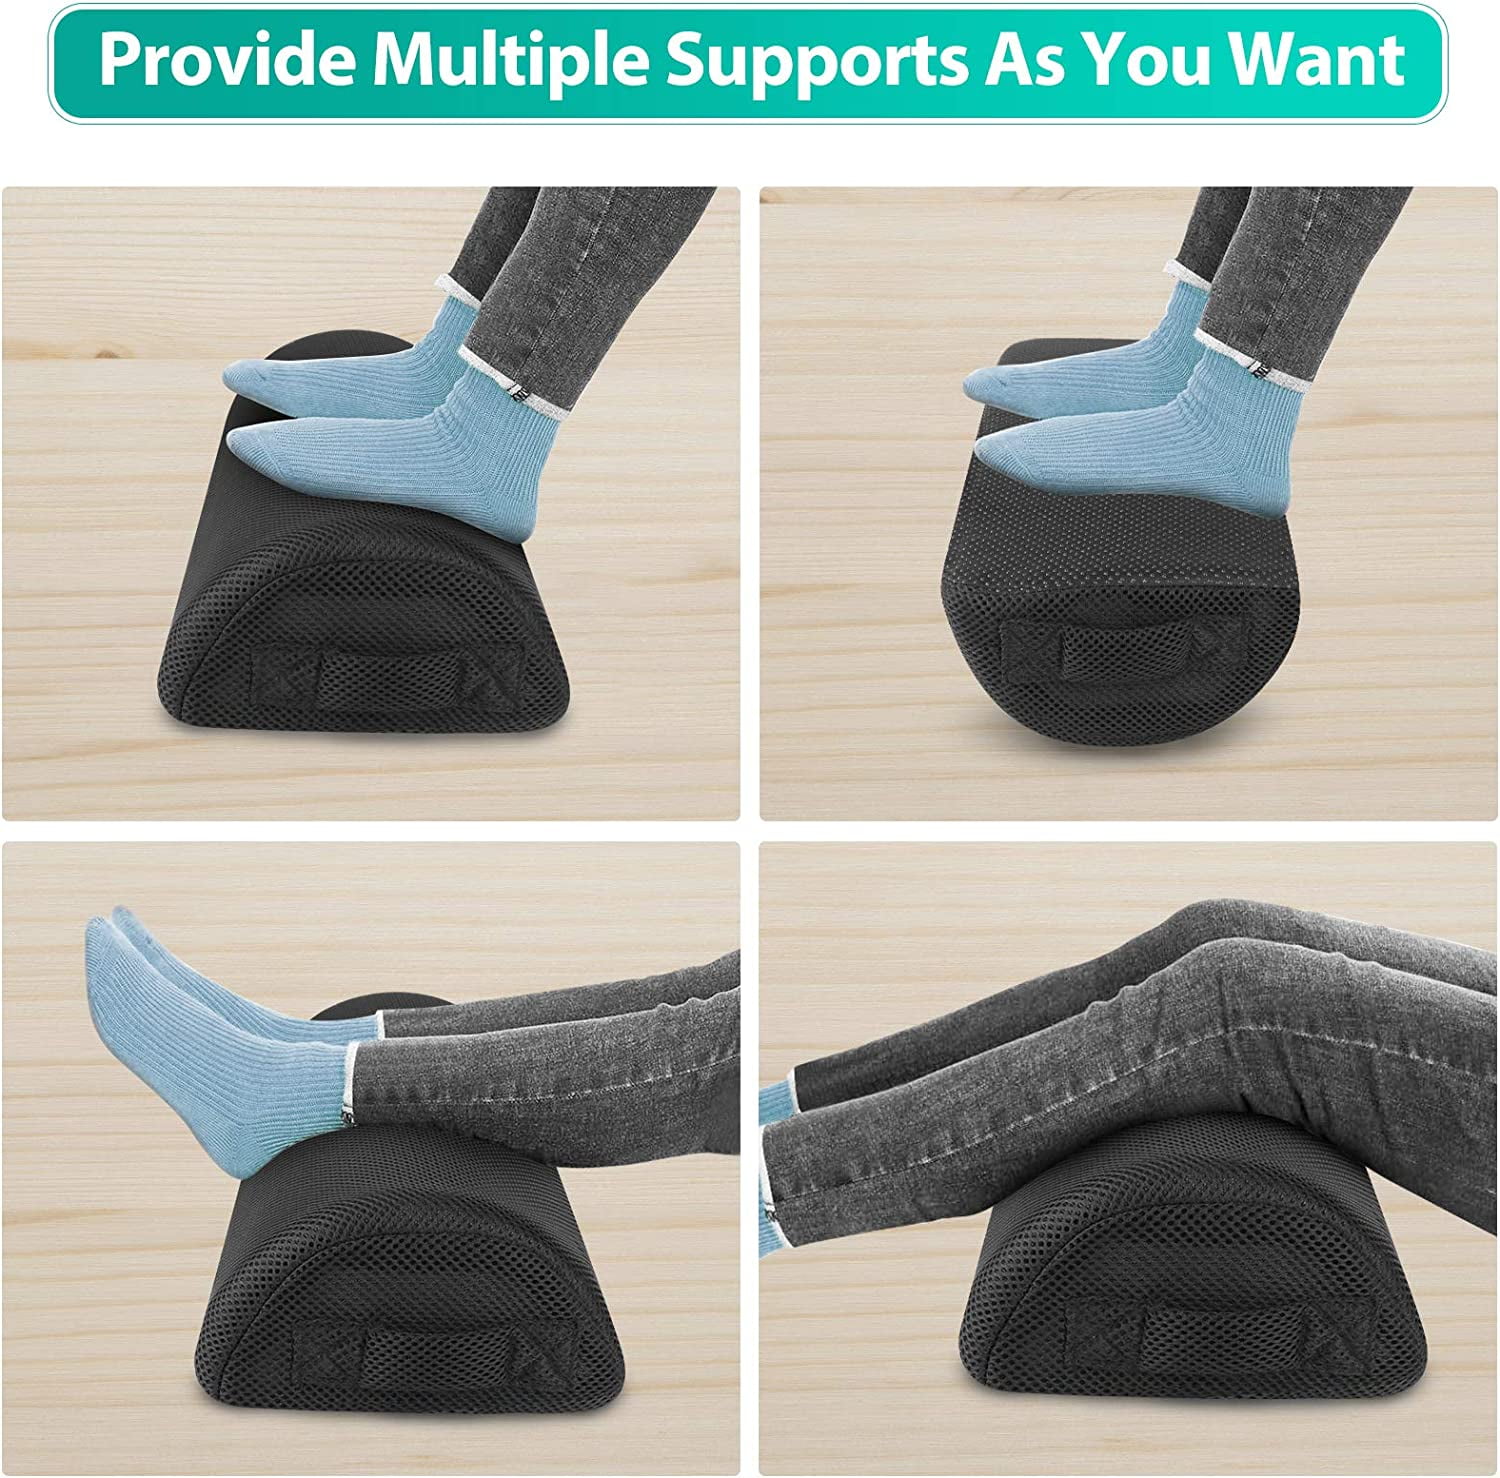 Ergonomic Footrest Pillow with High-Density Memory Foam Stays Soft Yet Firm Mixoo Foot Rest Cushion Under Desk Non-slip Foot Stool for Office Work Travel and Home 